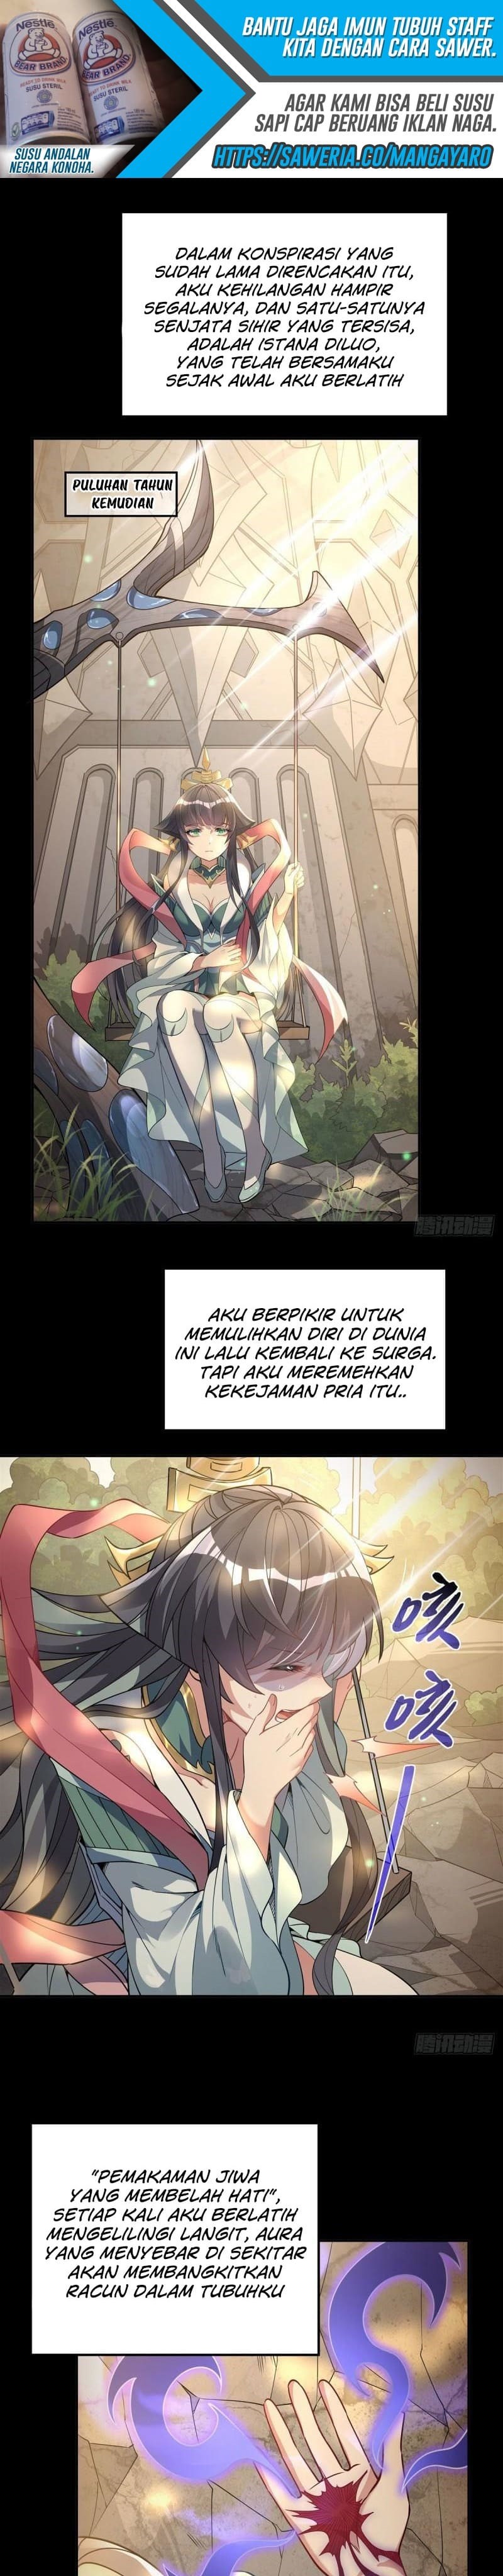 Dilarang COPAS - situs resmi www.mangacanblog.com - Komik my female apprentices are all big shots from the future 059 - chapter 59 60 Indonesia my female apprentices are all big shots from the future 059 - chapter 59 Terbaru 7|Baca Manga Komik Indonesia|Mangacan